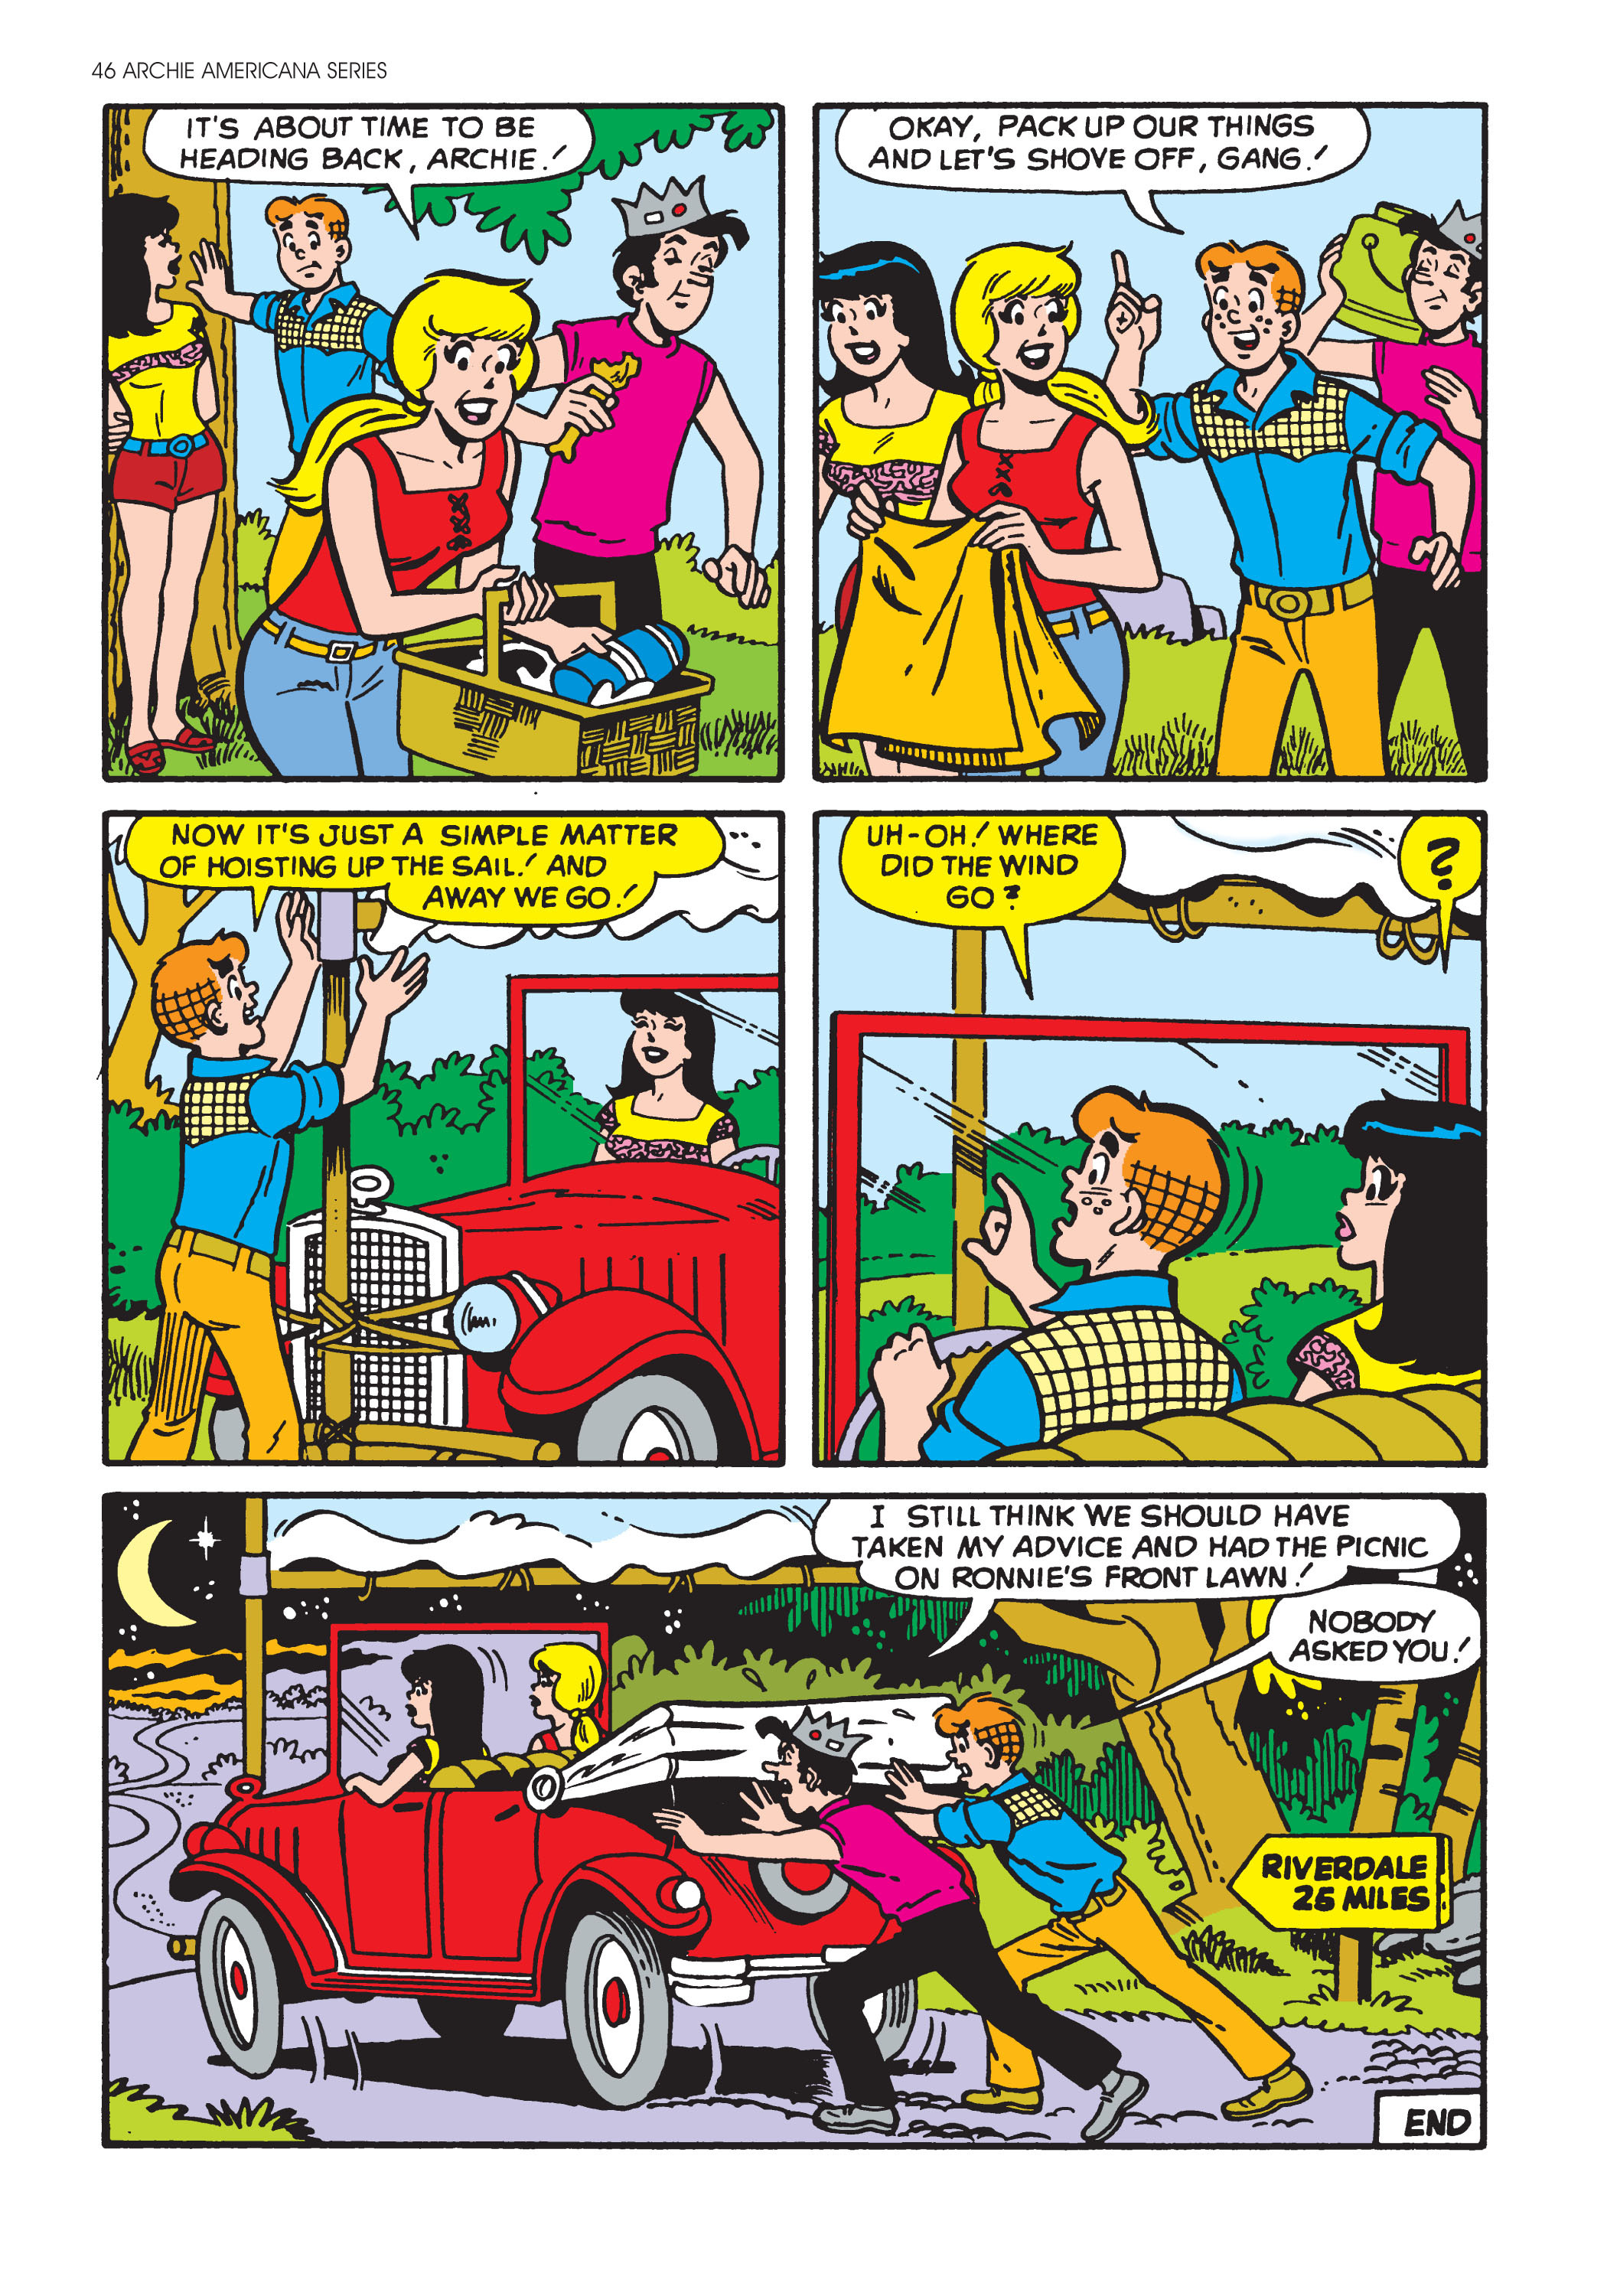 Read online Archie Americana Series comic -  Issue # TPB 4 - 48